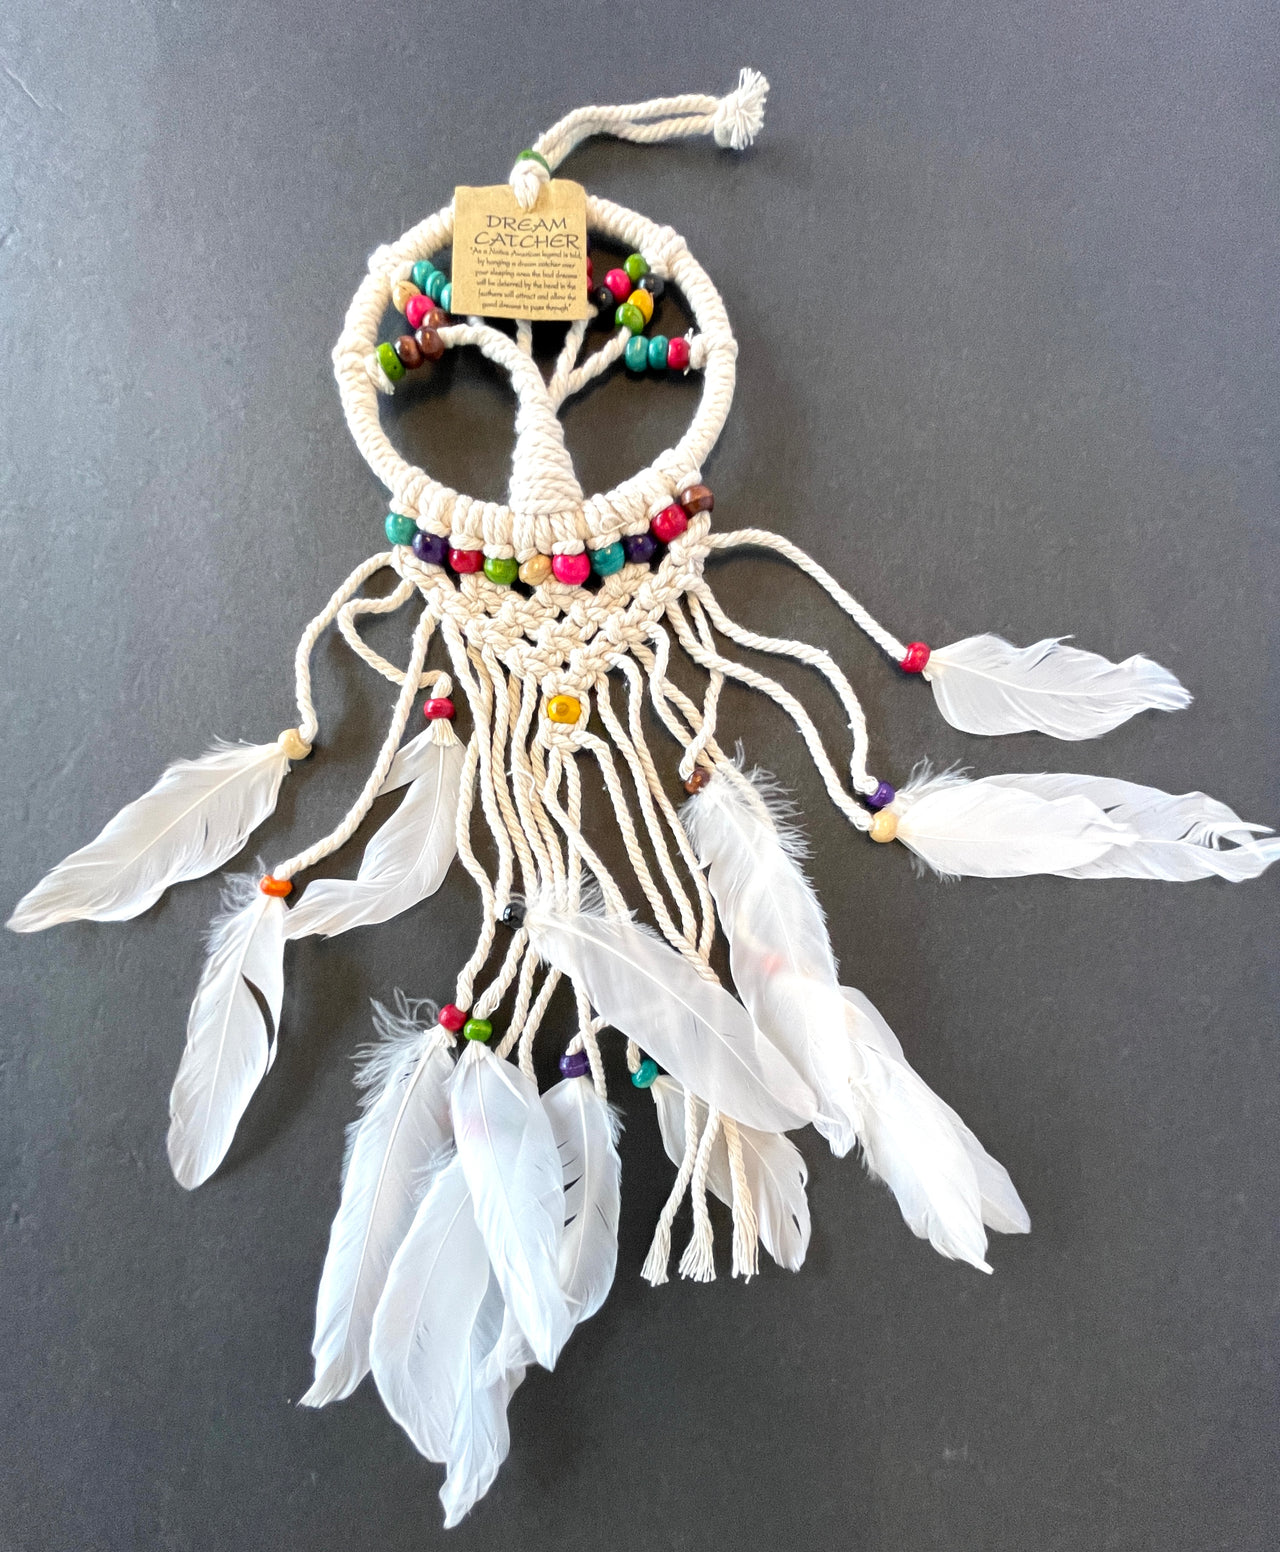 Mini cotton dreamcatcher with feathers